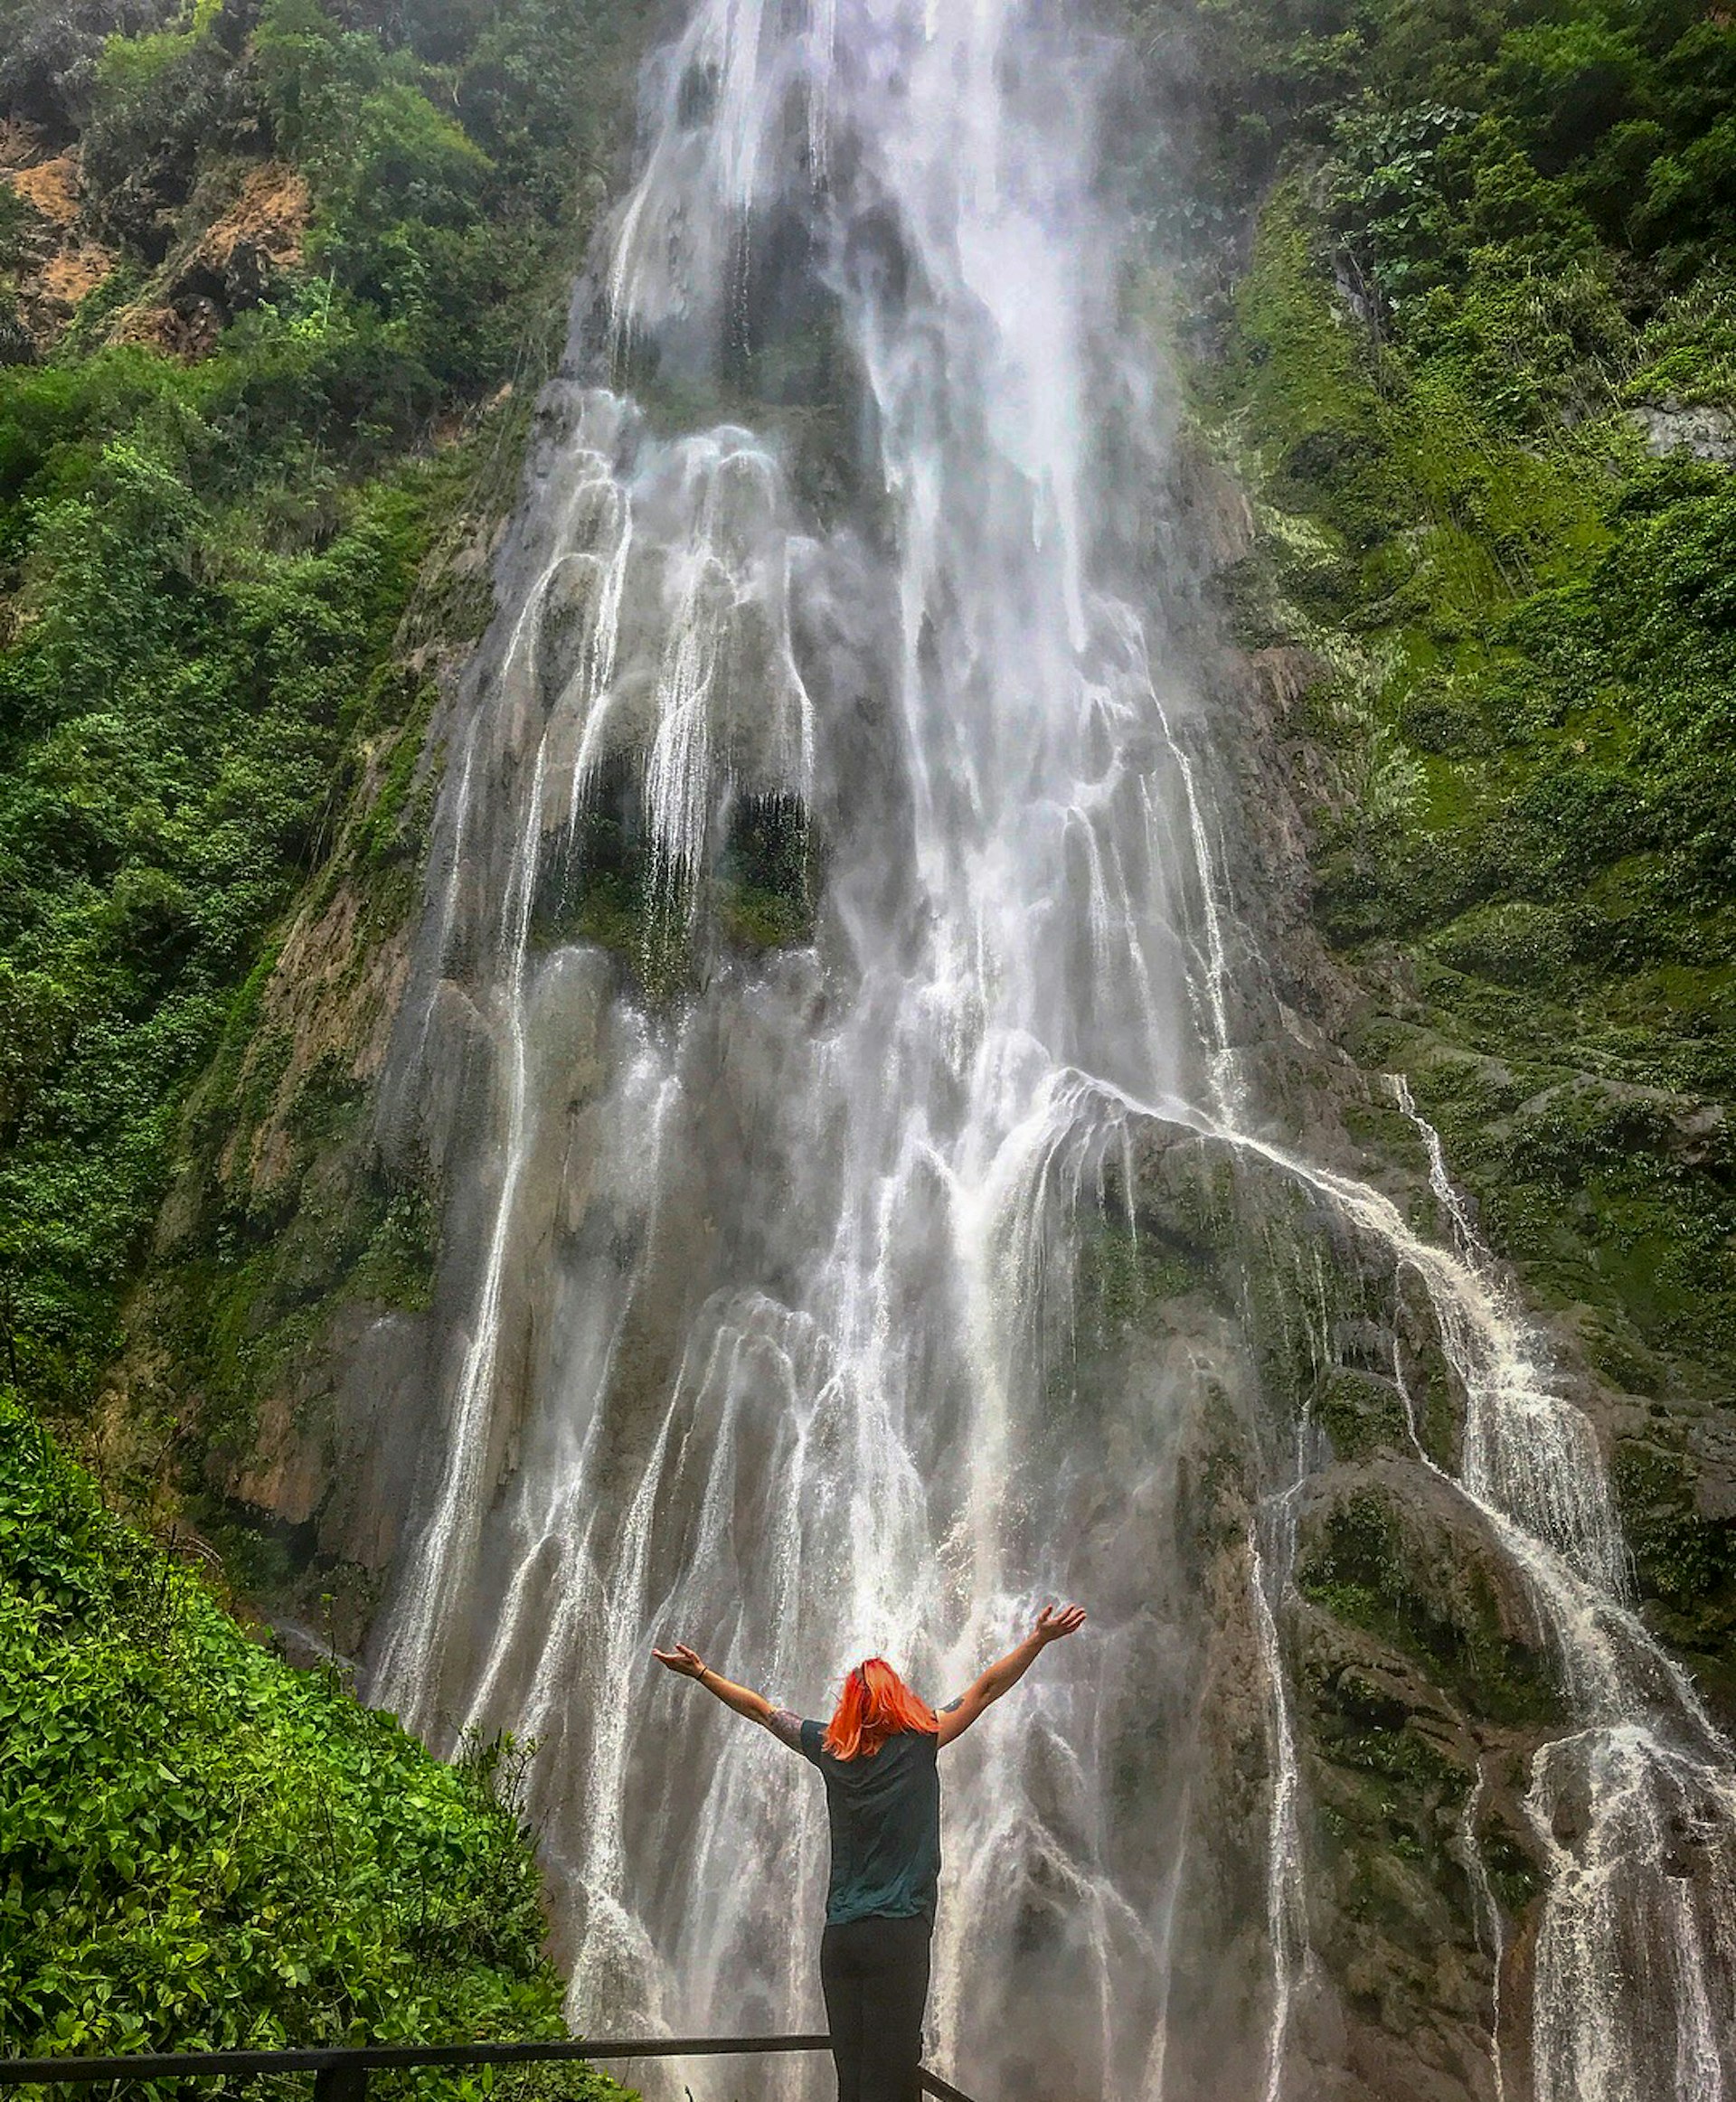 A woman with orange hair stands in front of a tall waterfall with her arms outstretched